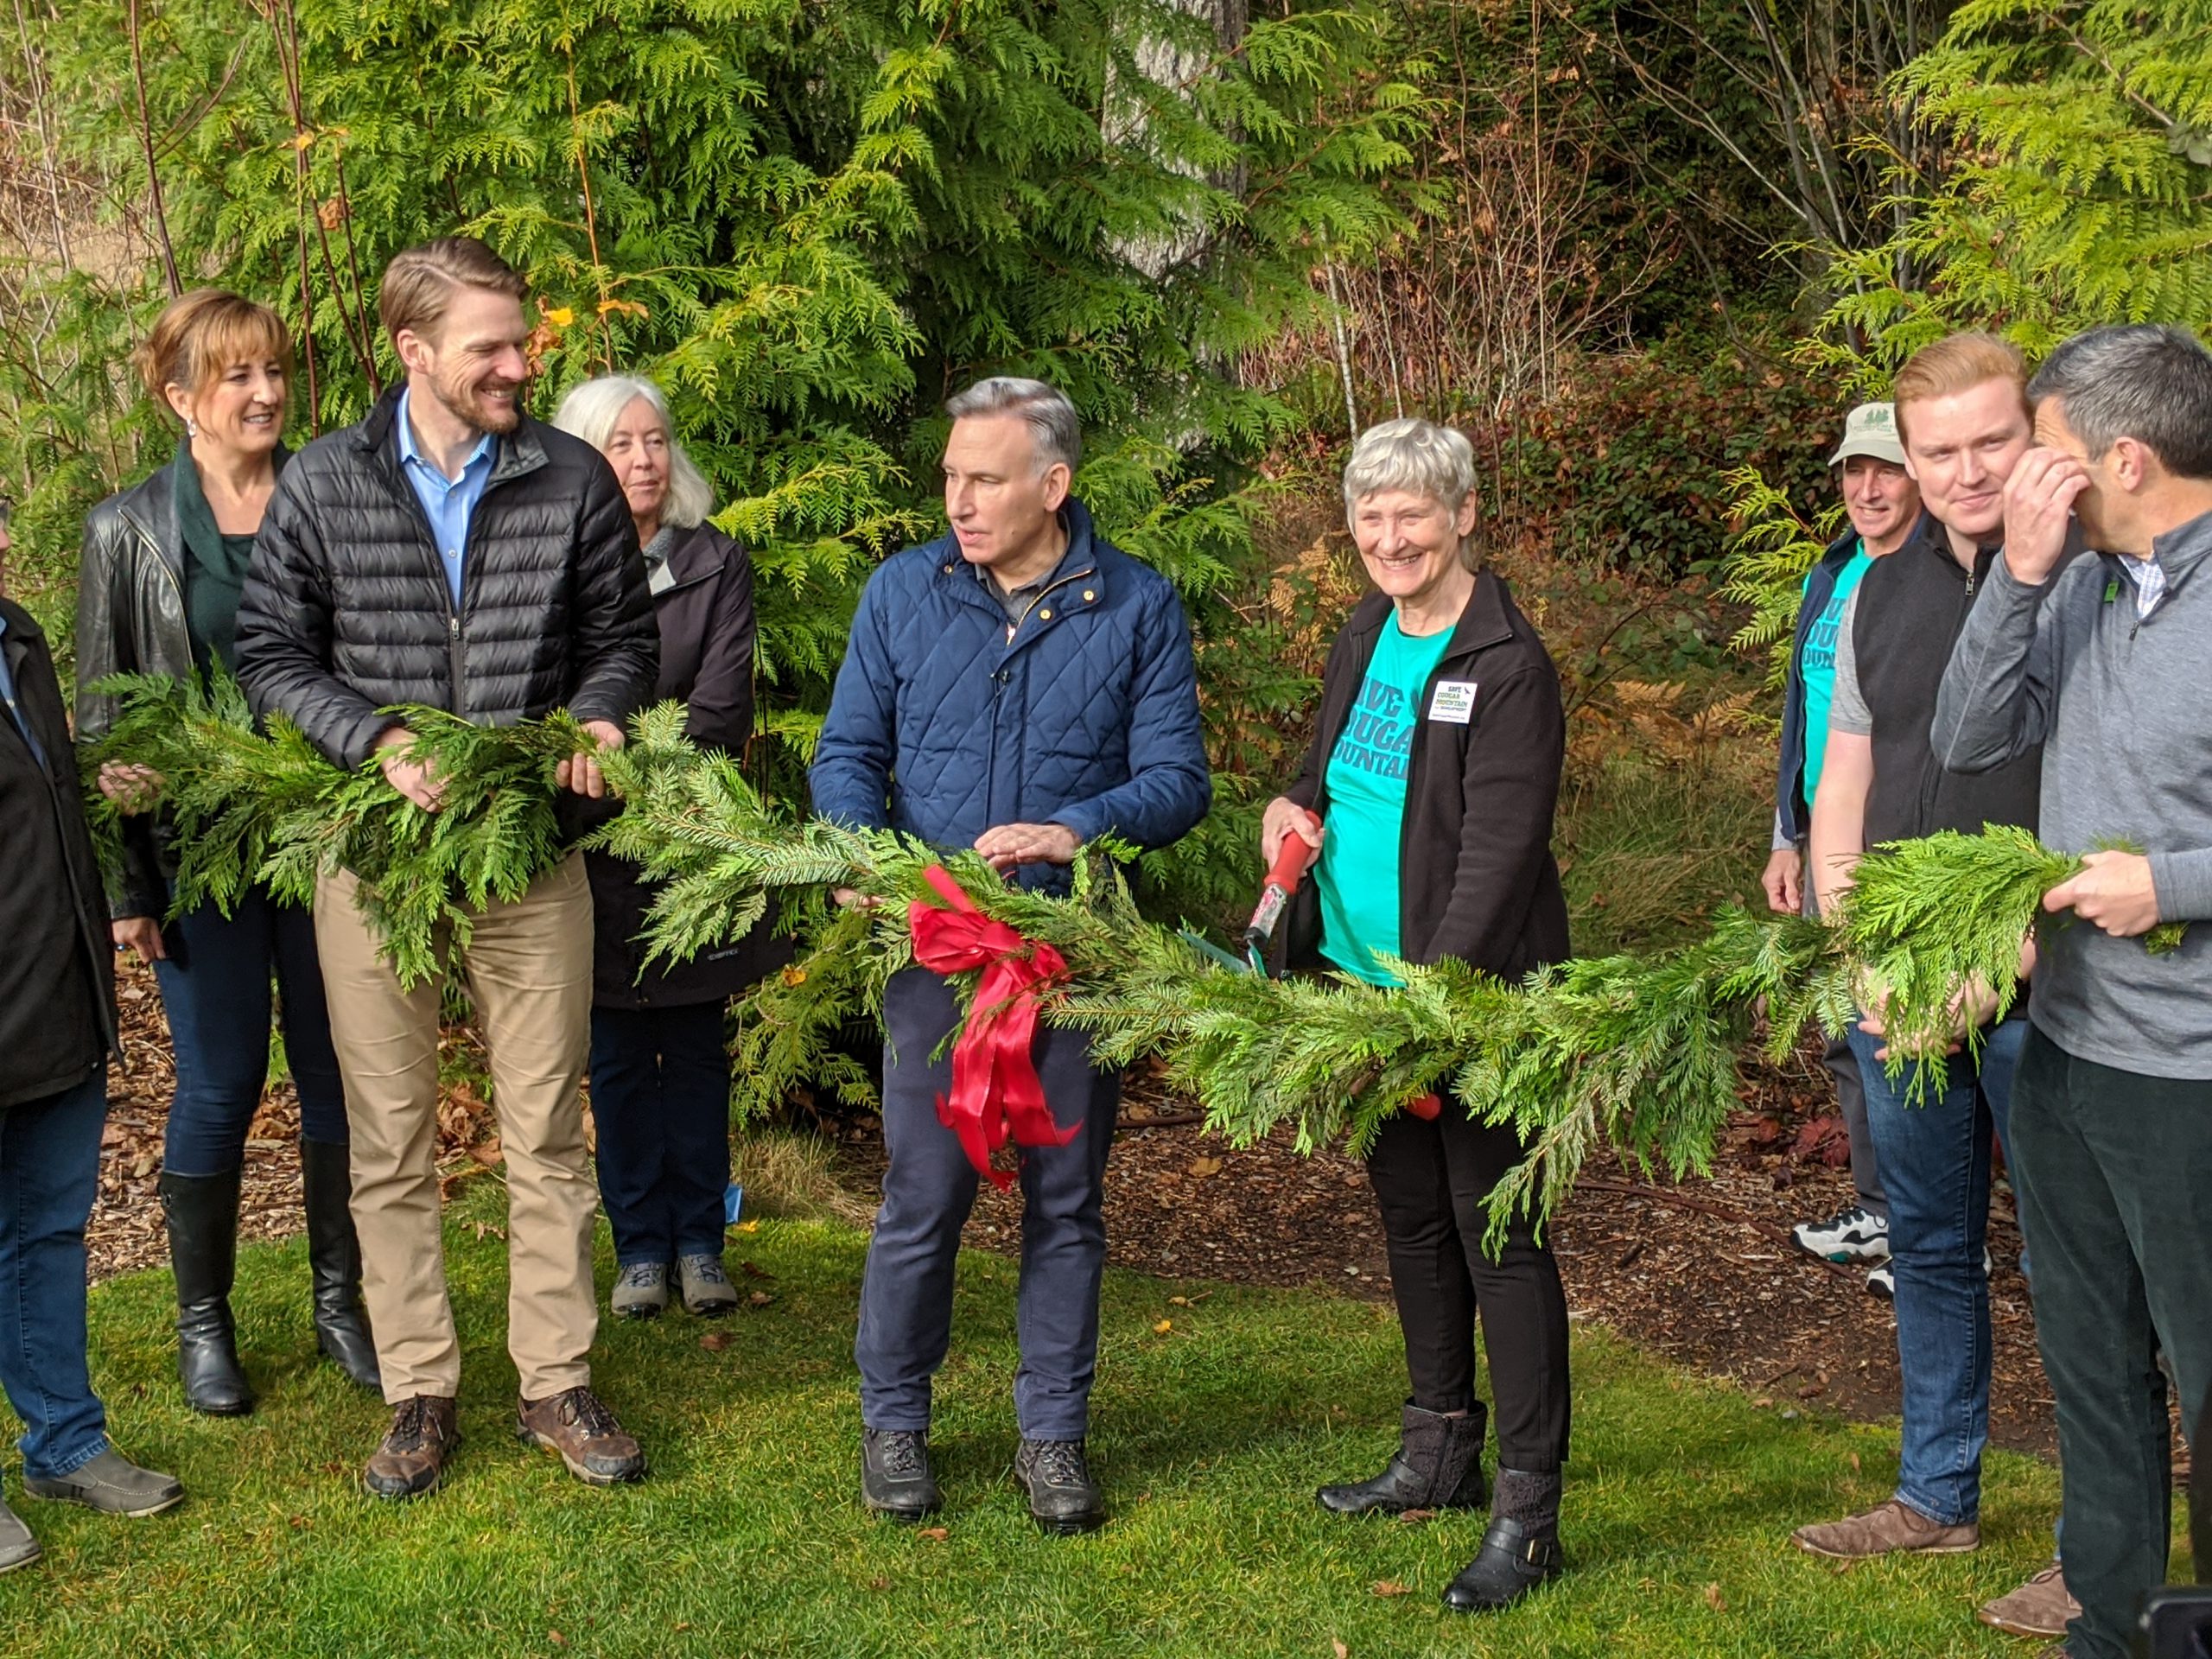 About 10 people in a green lawn hold a long garland and prepare to cut it with scissors